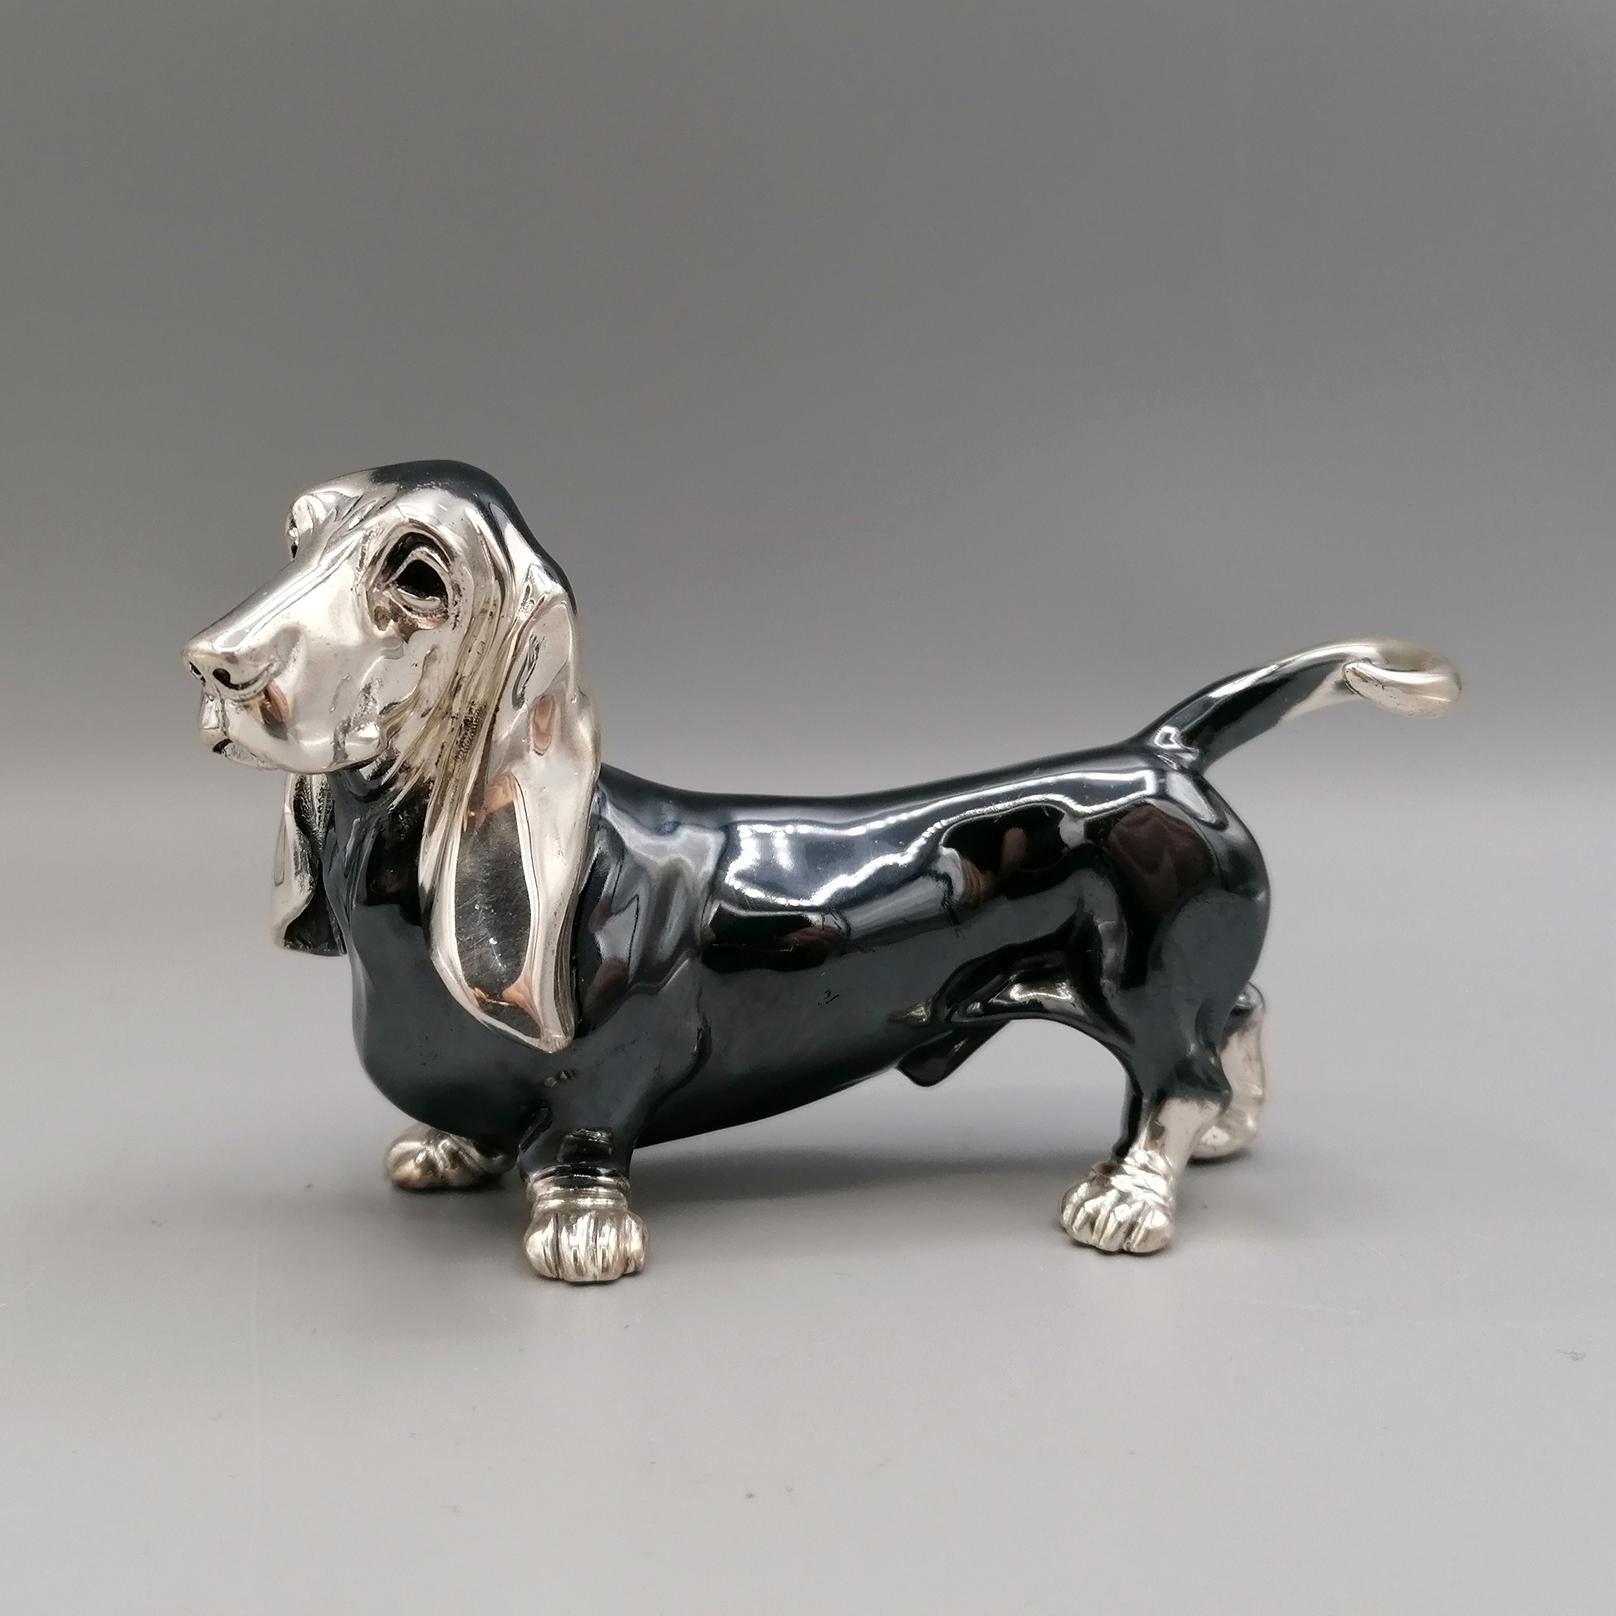 Basset hound dog statuette in 800 solid silver.
The object was made with the technique of fusion in two halves and subsequently joined by welding. 
In the lower part of the statuette you can see the two holes made to let the welding vapors